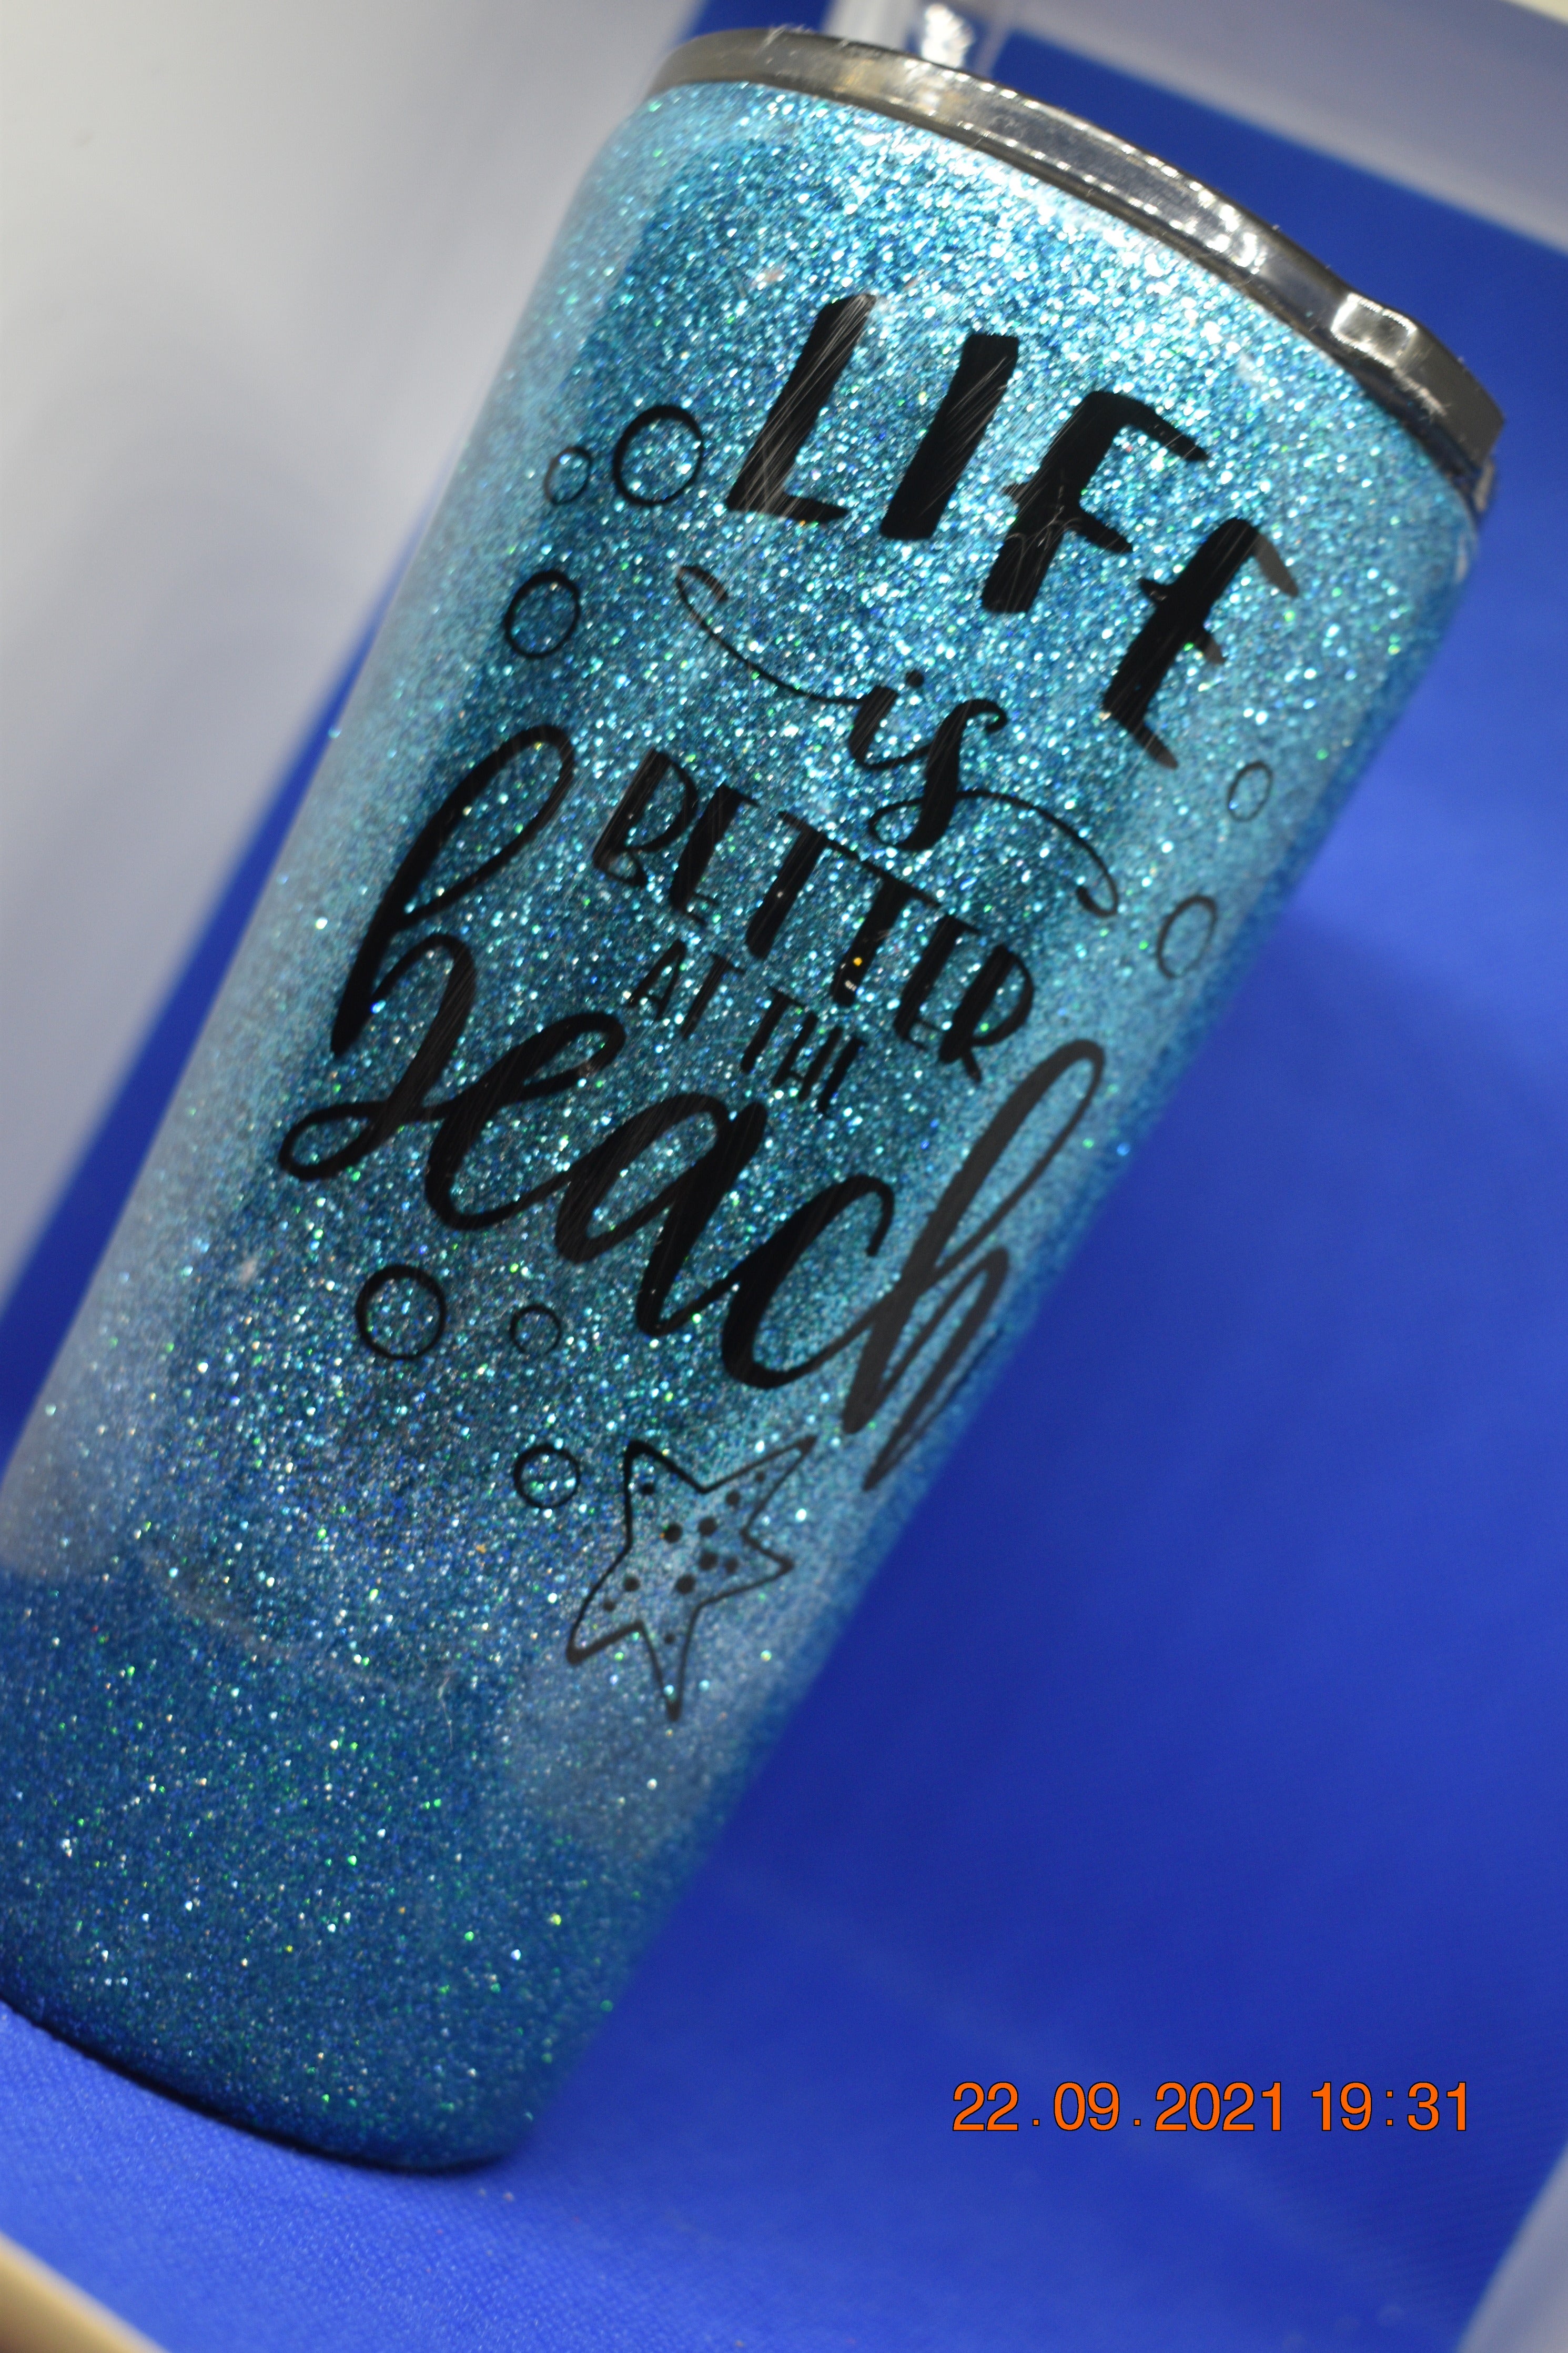 Life is better at the beach, tumbler – MTNSideGifts